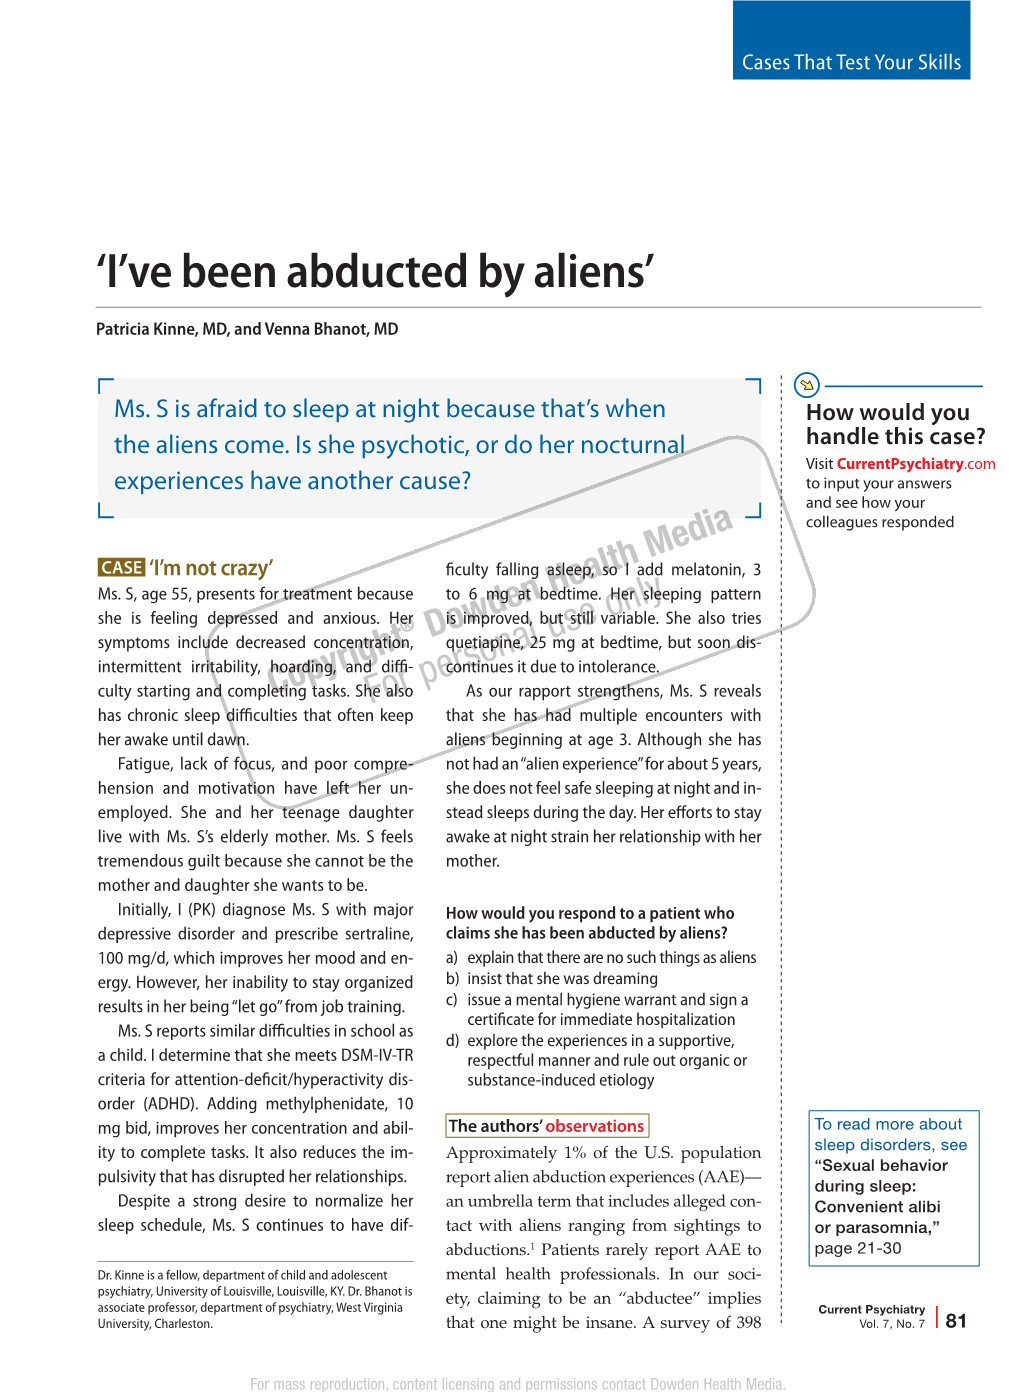 'I've Been Abducted by Aliens'